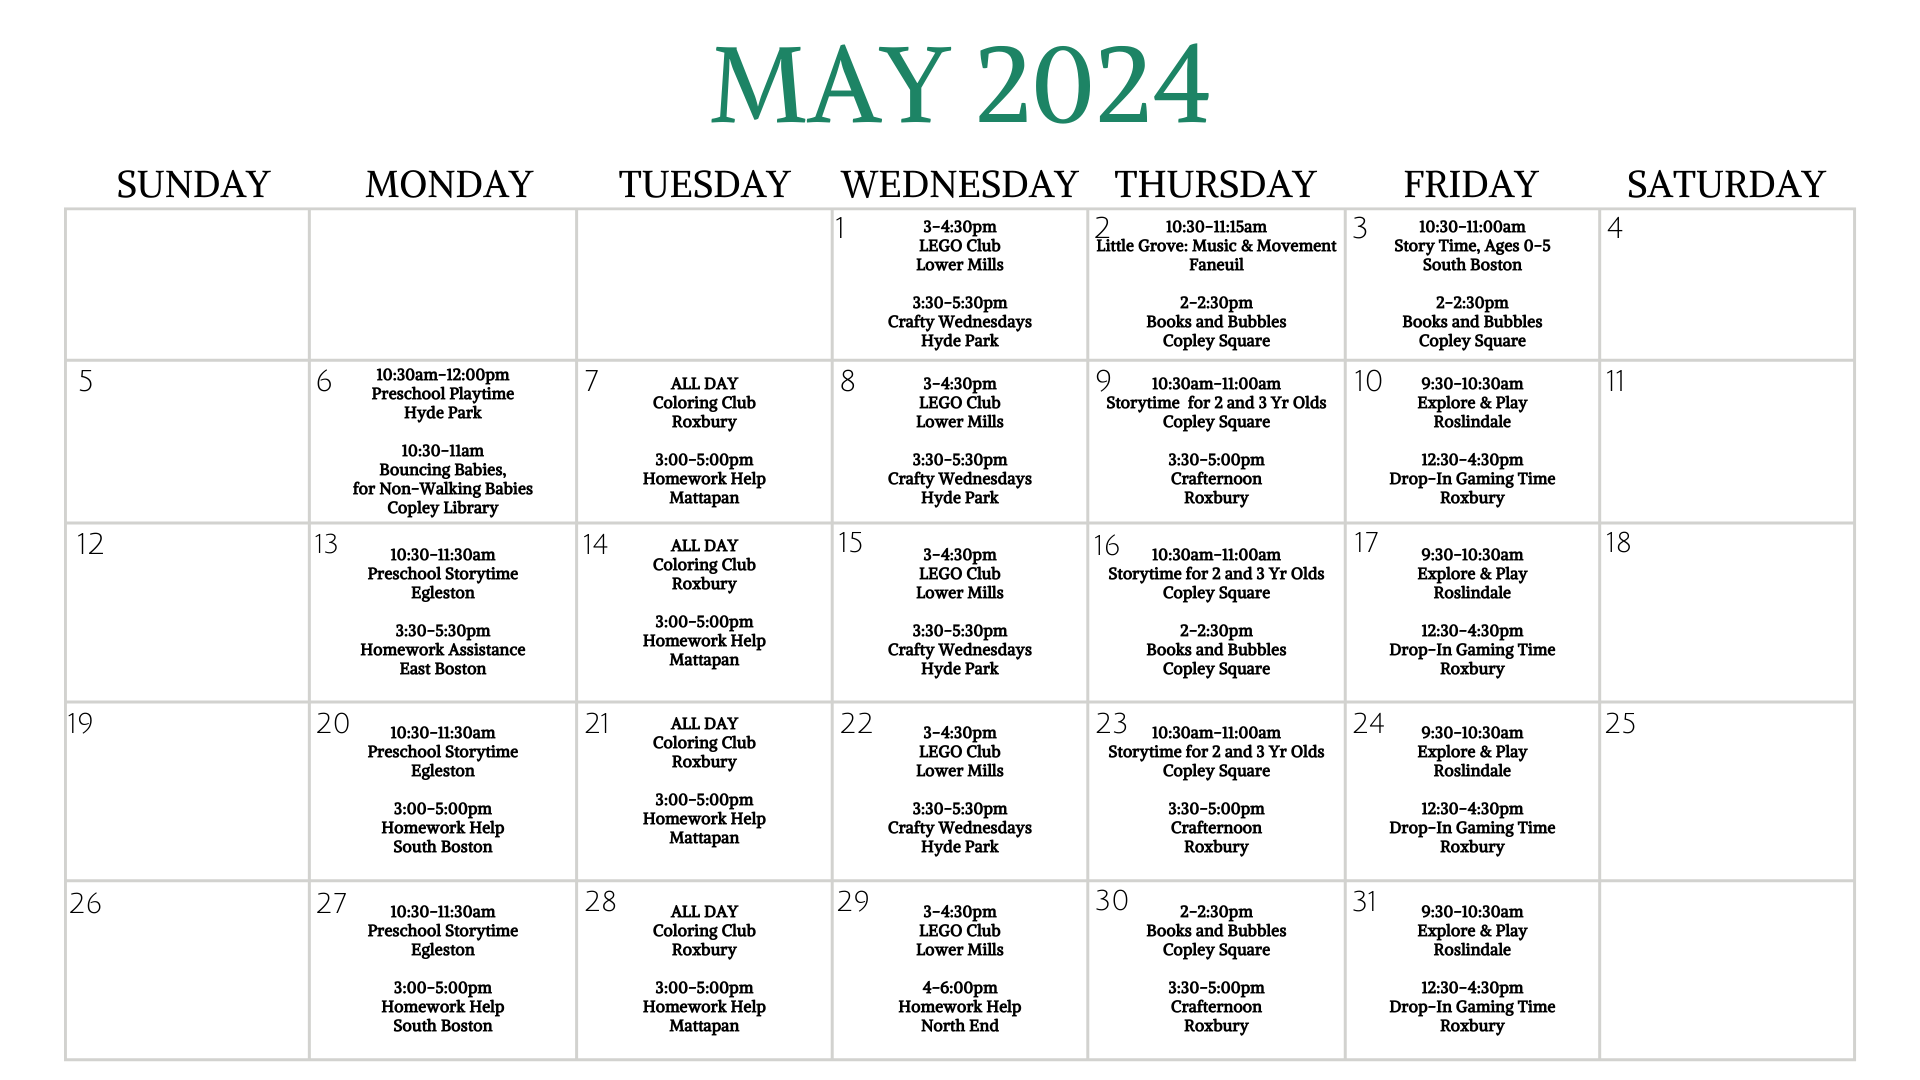 May 2024 calendar with BPL events